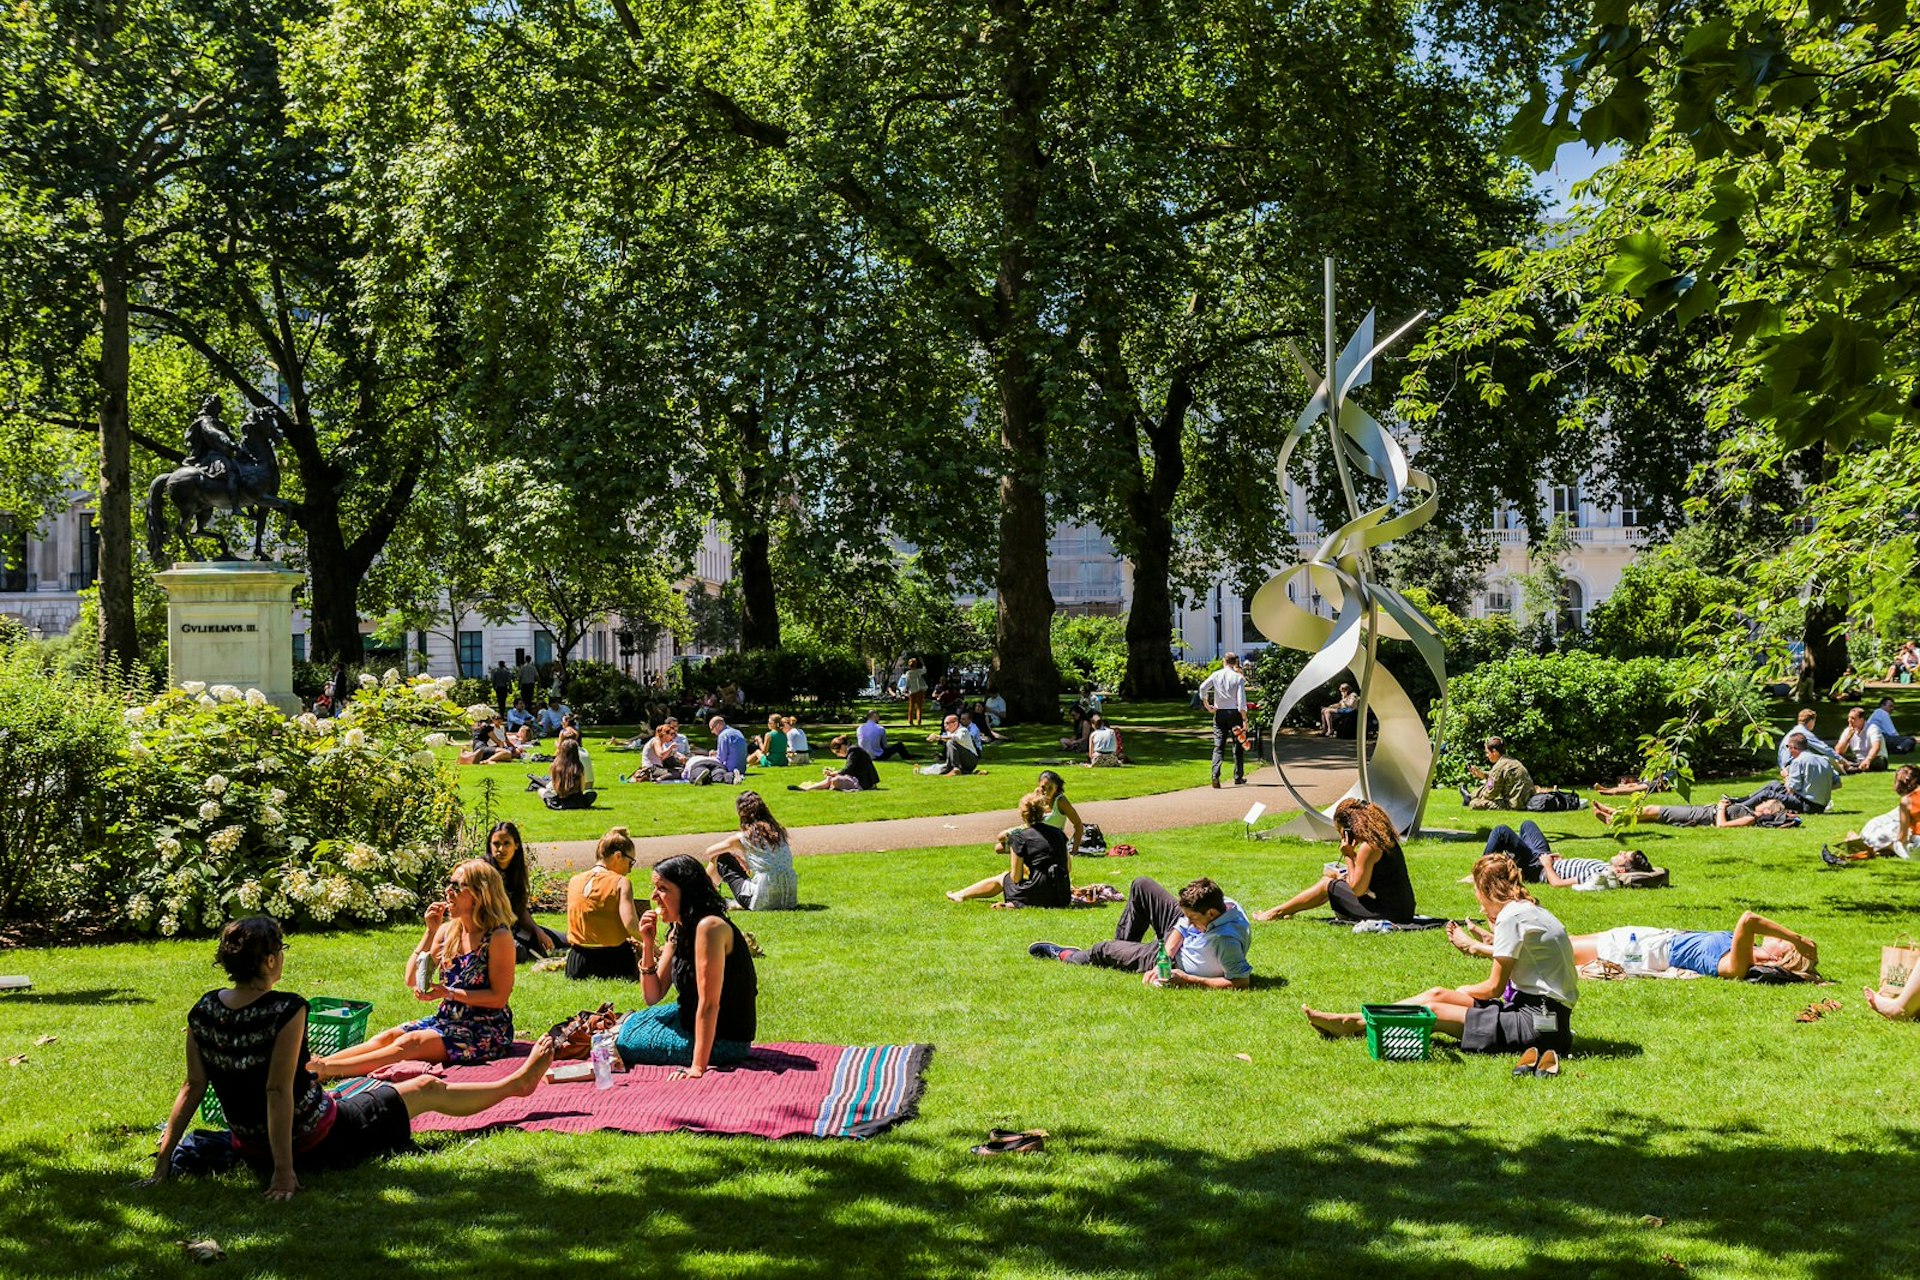 People picnicking in a park in London in sunny weather